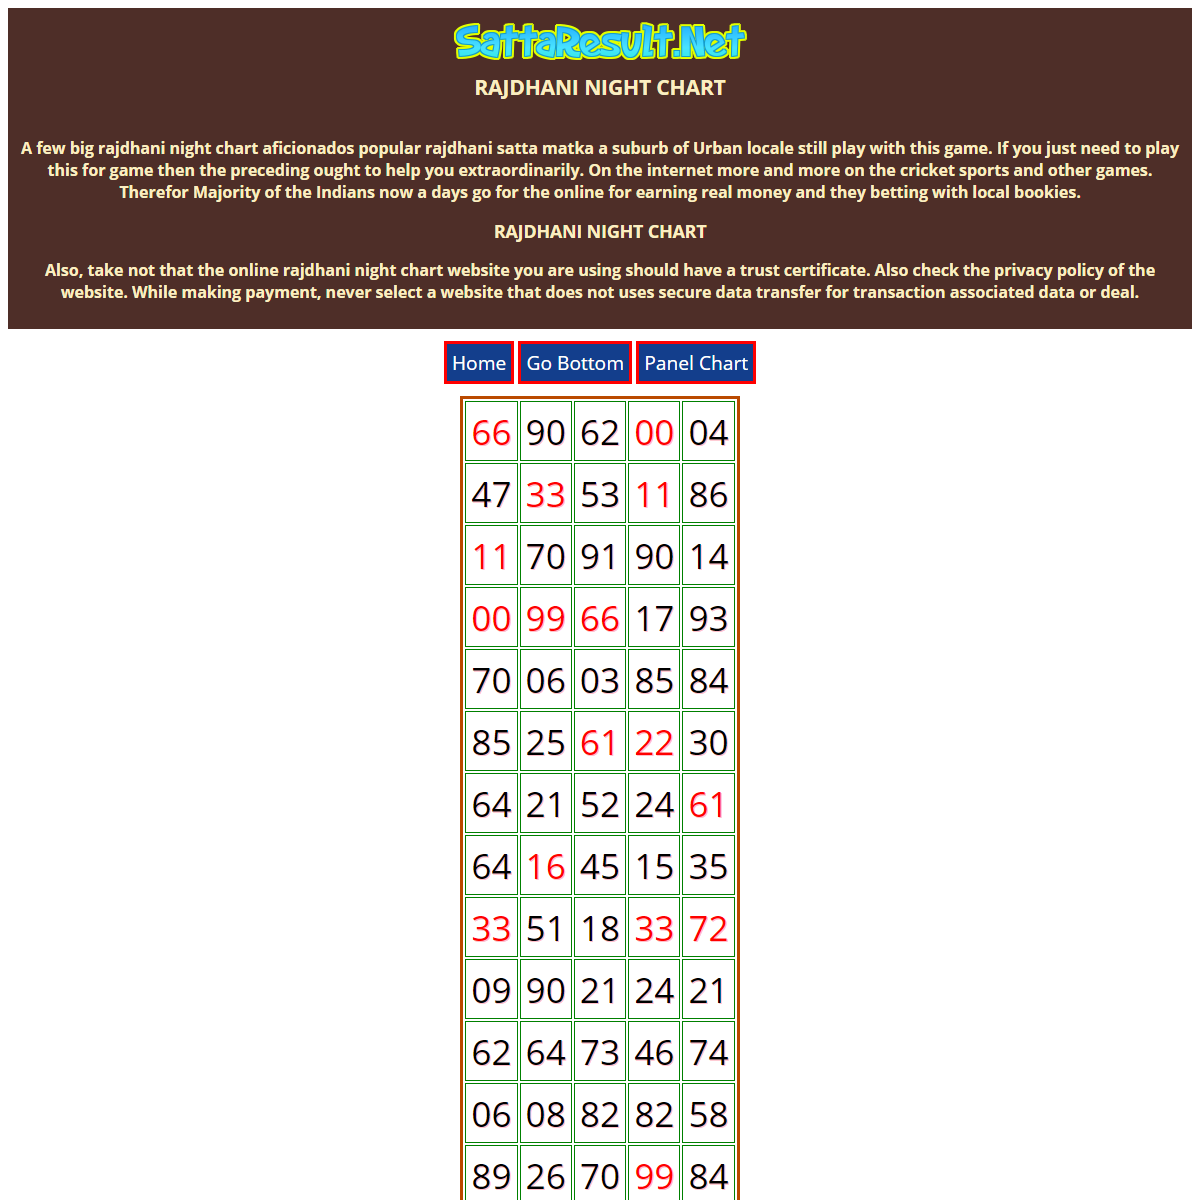 A complete backup of https://sattaresult.net/rajdhani-night-chart.php